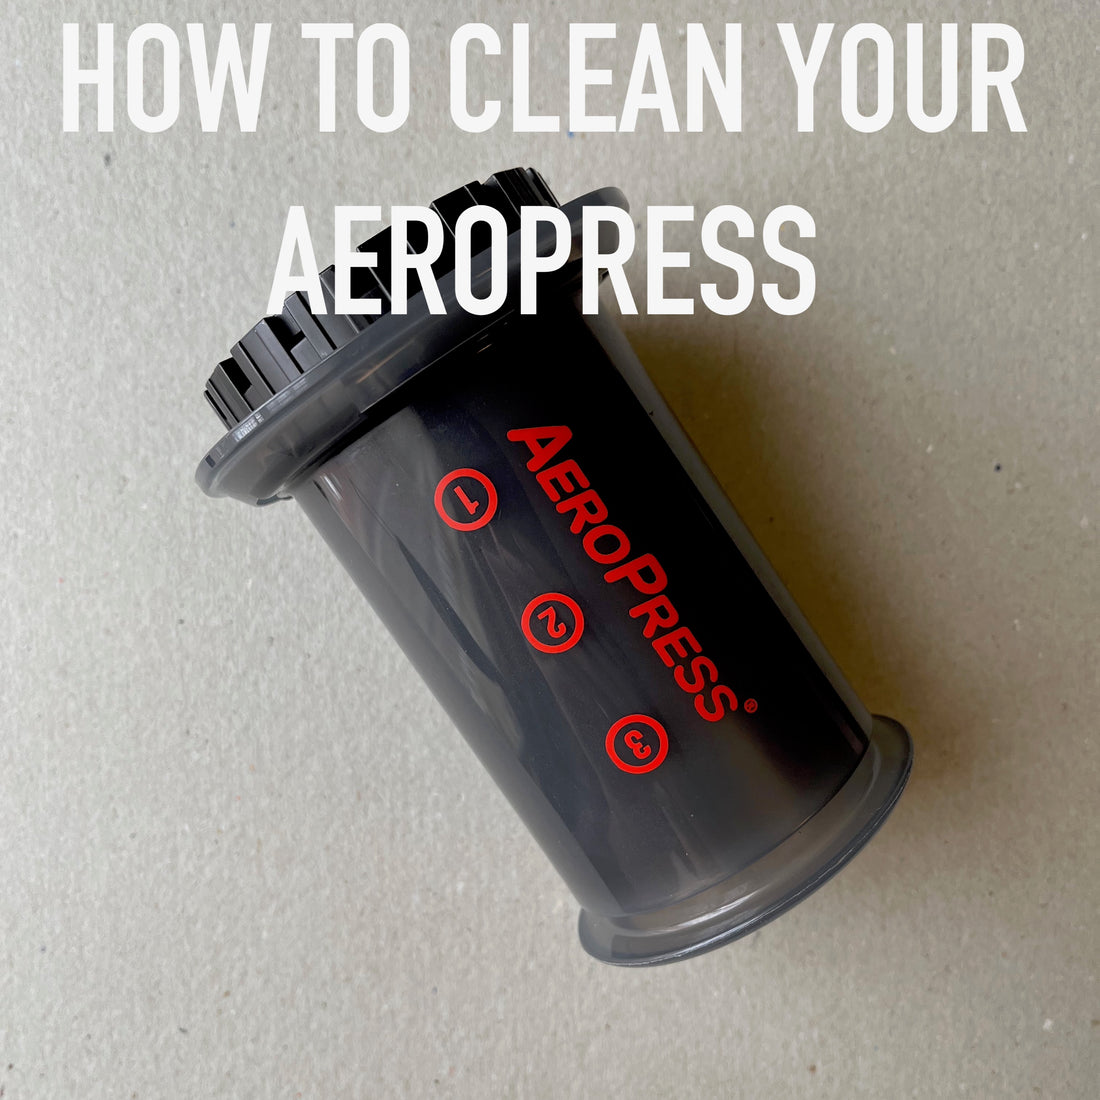 How To Clean Your AeroPress AeroPress Go Coffee Plunger Coffee Brewer Coffee Filter Pour over Coffee AeroPress AeroPress Go Basic Barista Australia Melbourne